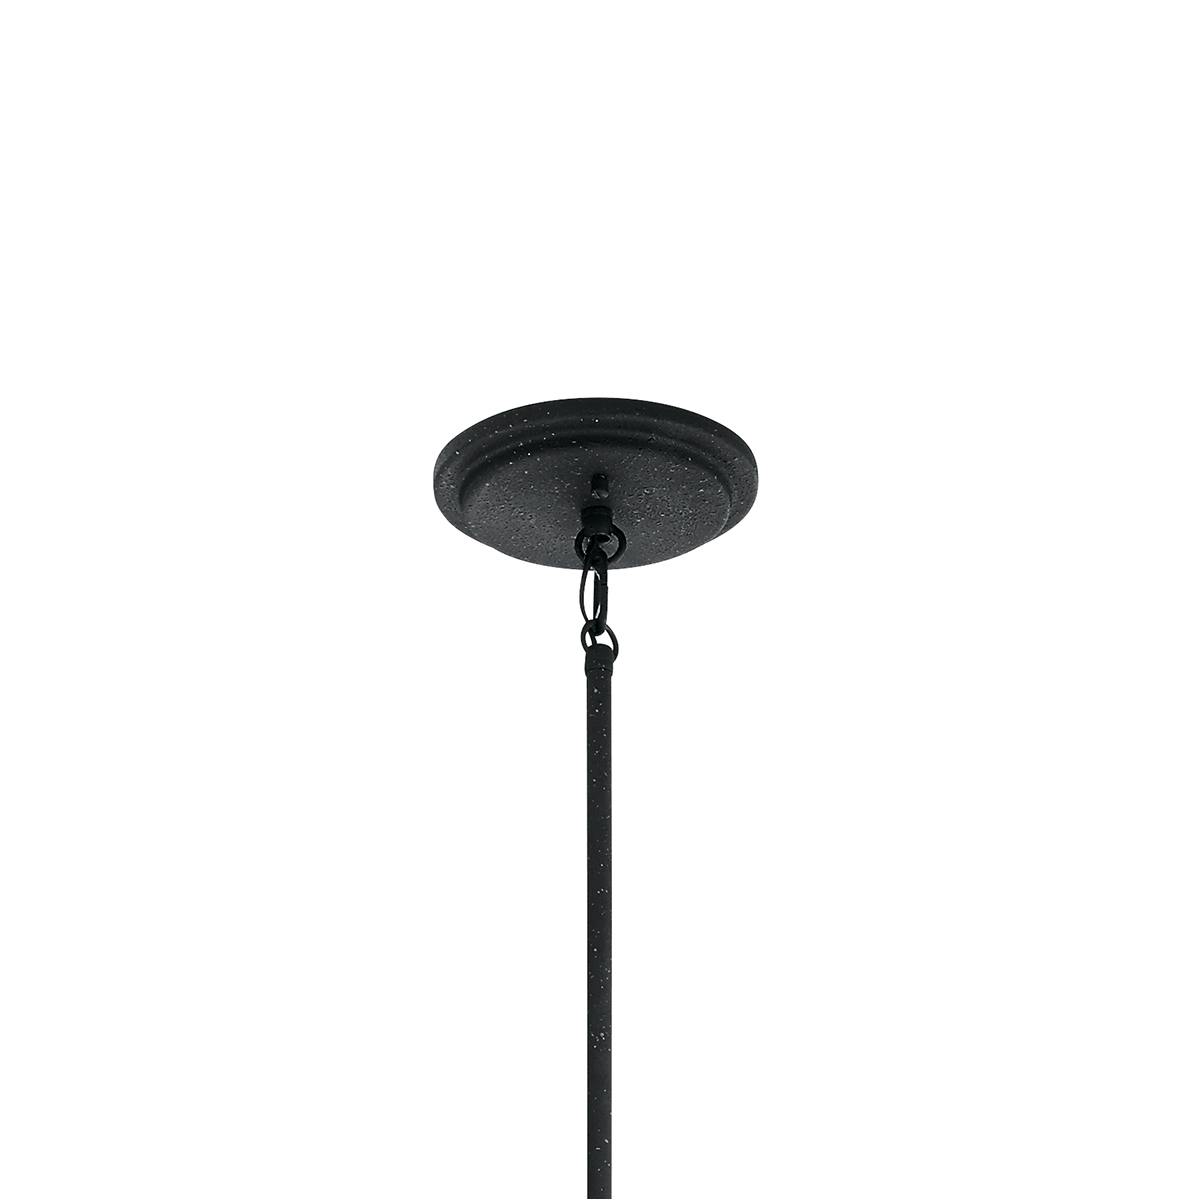 Canopy image of the Royal Marine Outdoor Hanging Light 49145DBK on a white background